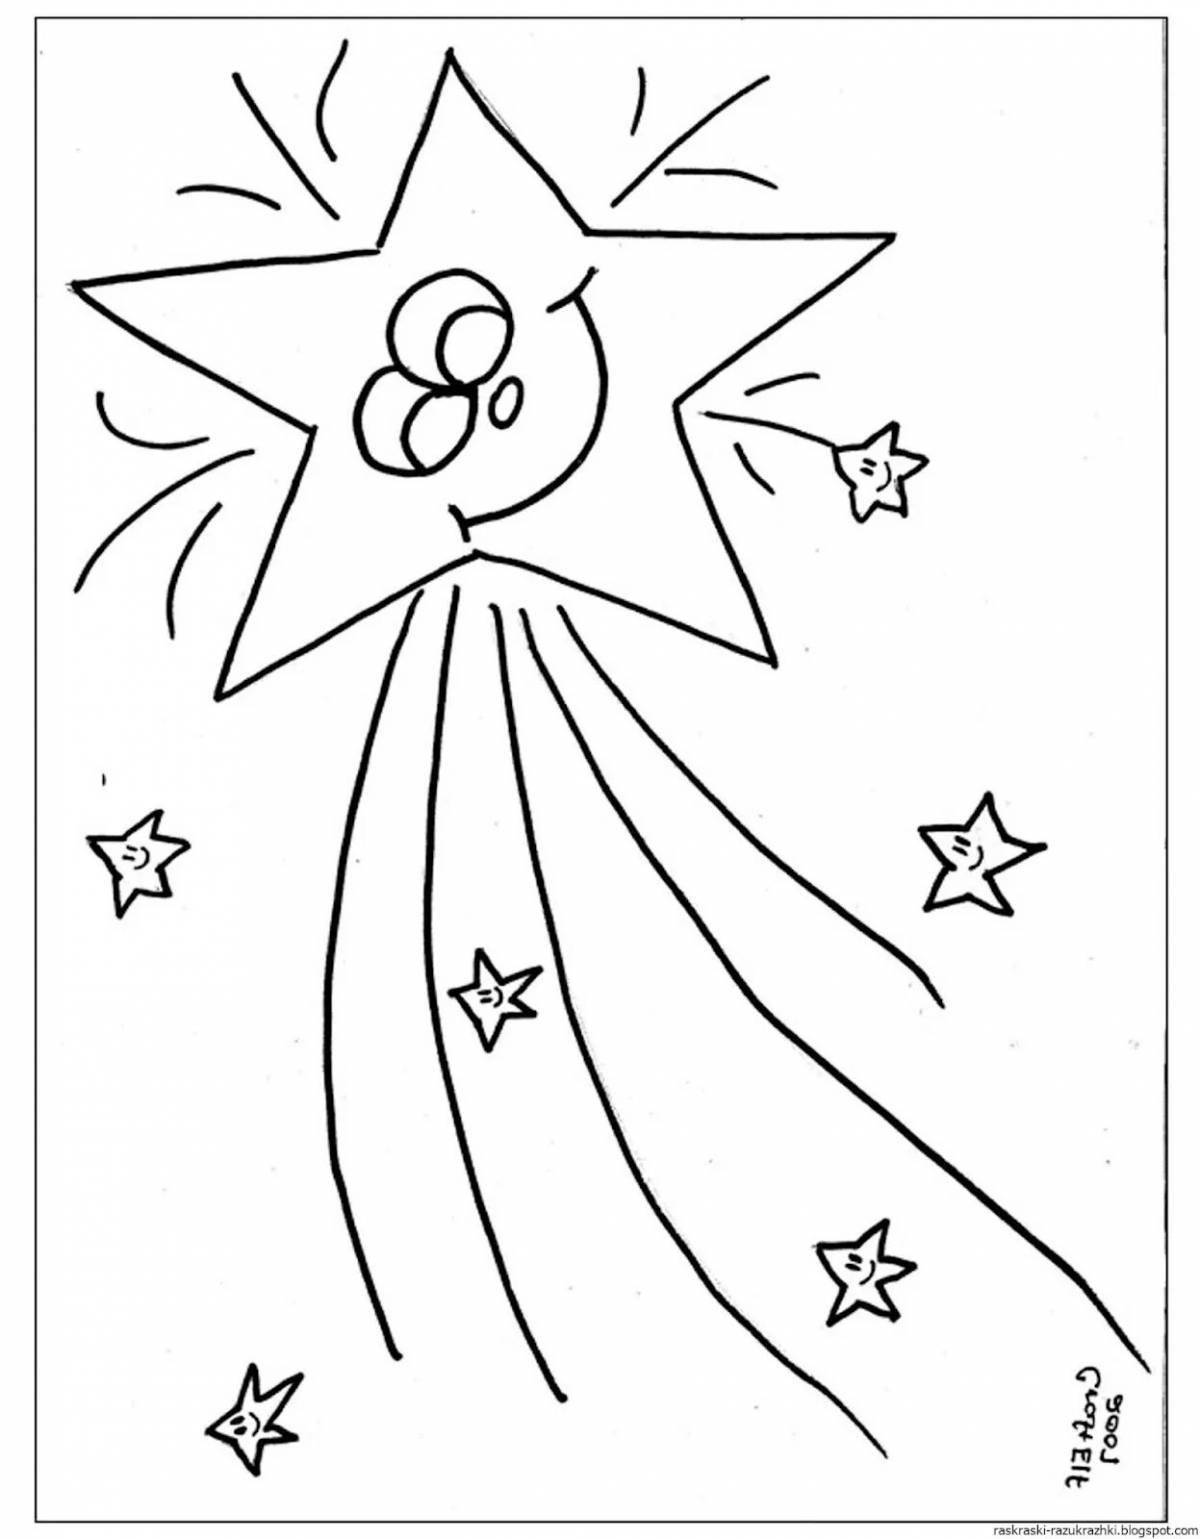 Fairy stars coloring pages for kids